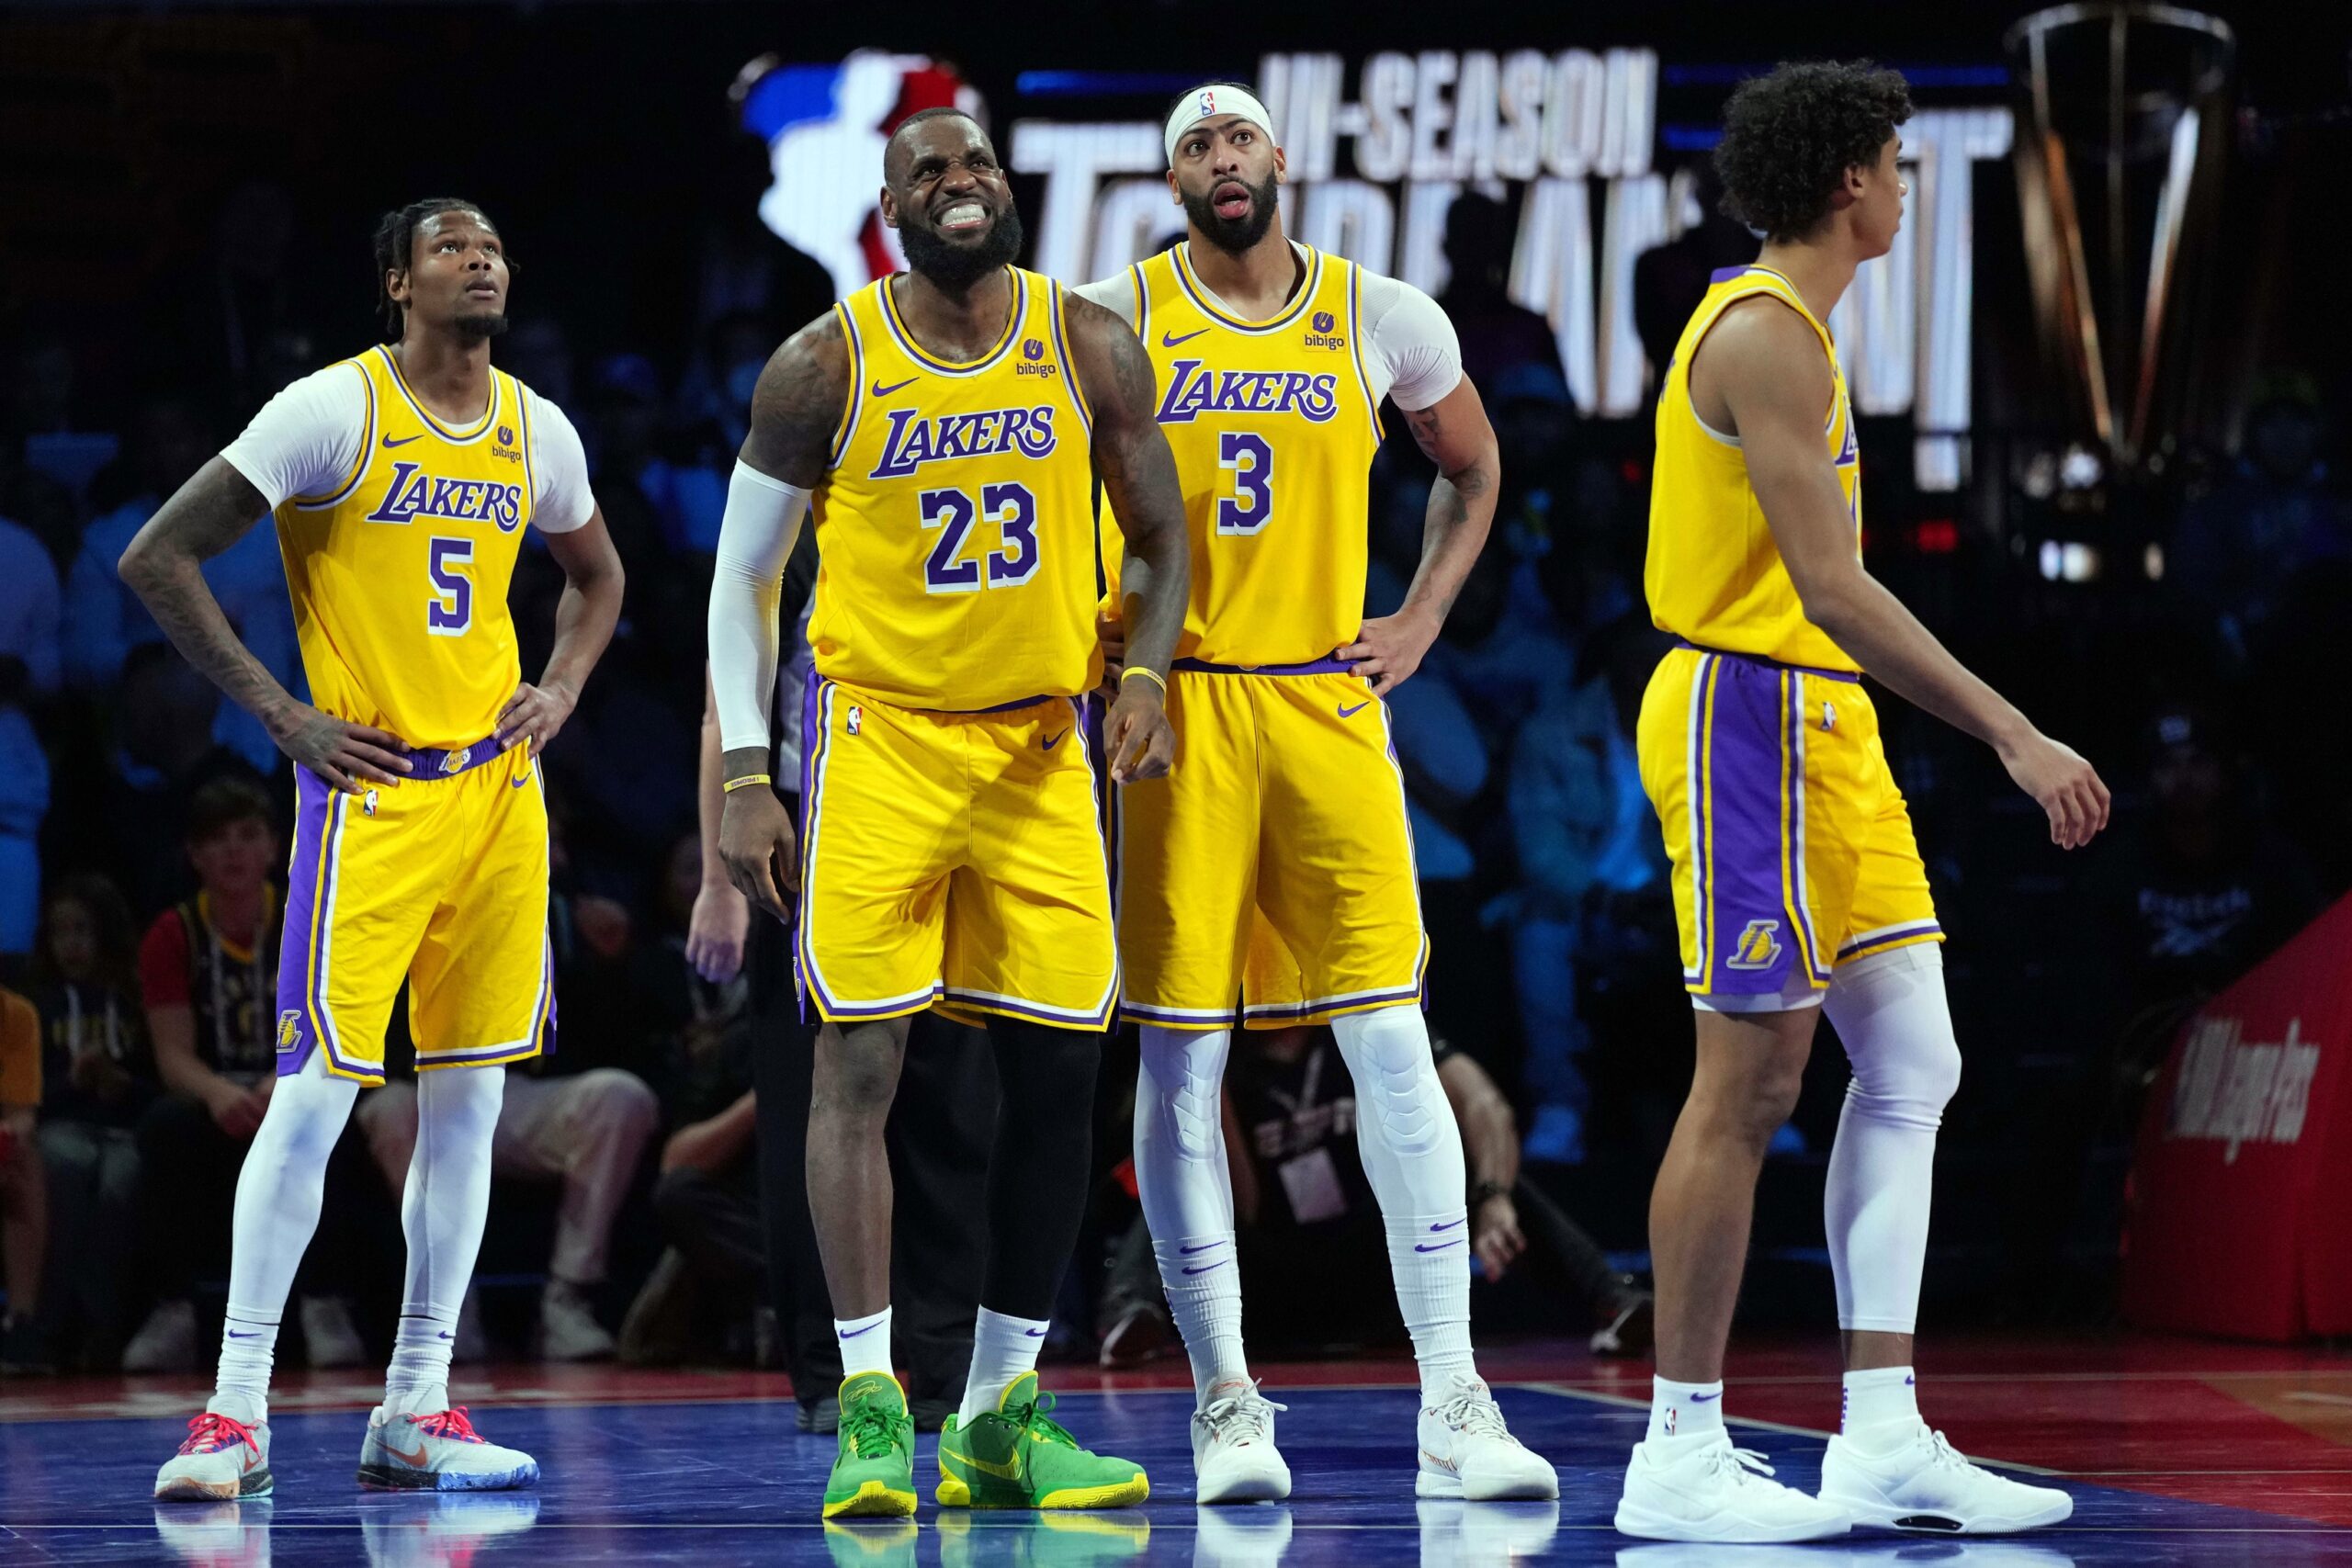 Los Angeles Lakers forward LeBron James (23) and forward Cam Reddish (5) and forward Anthony Davis (3) look on after a play against the Indiana Pacers in the fourth quarter of the in season tournament championship final at T-Mobile Arena.